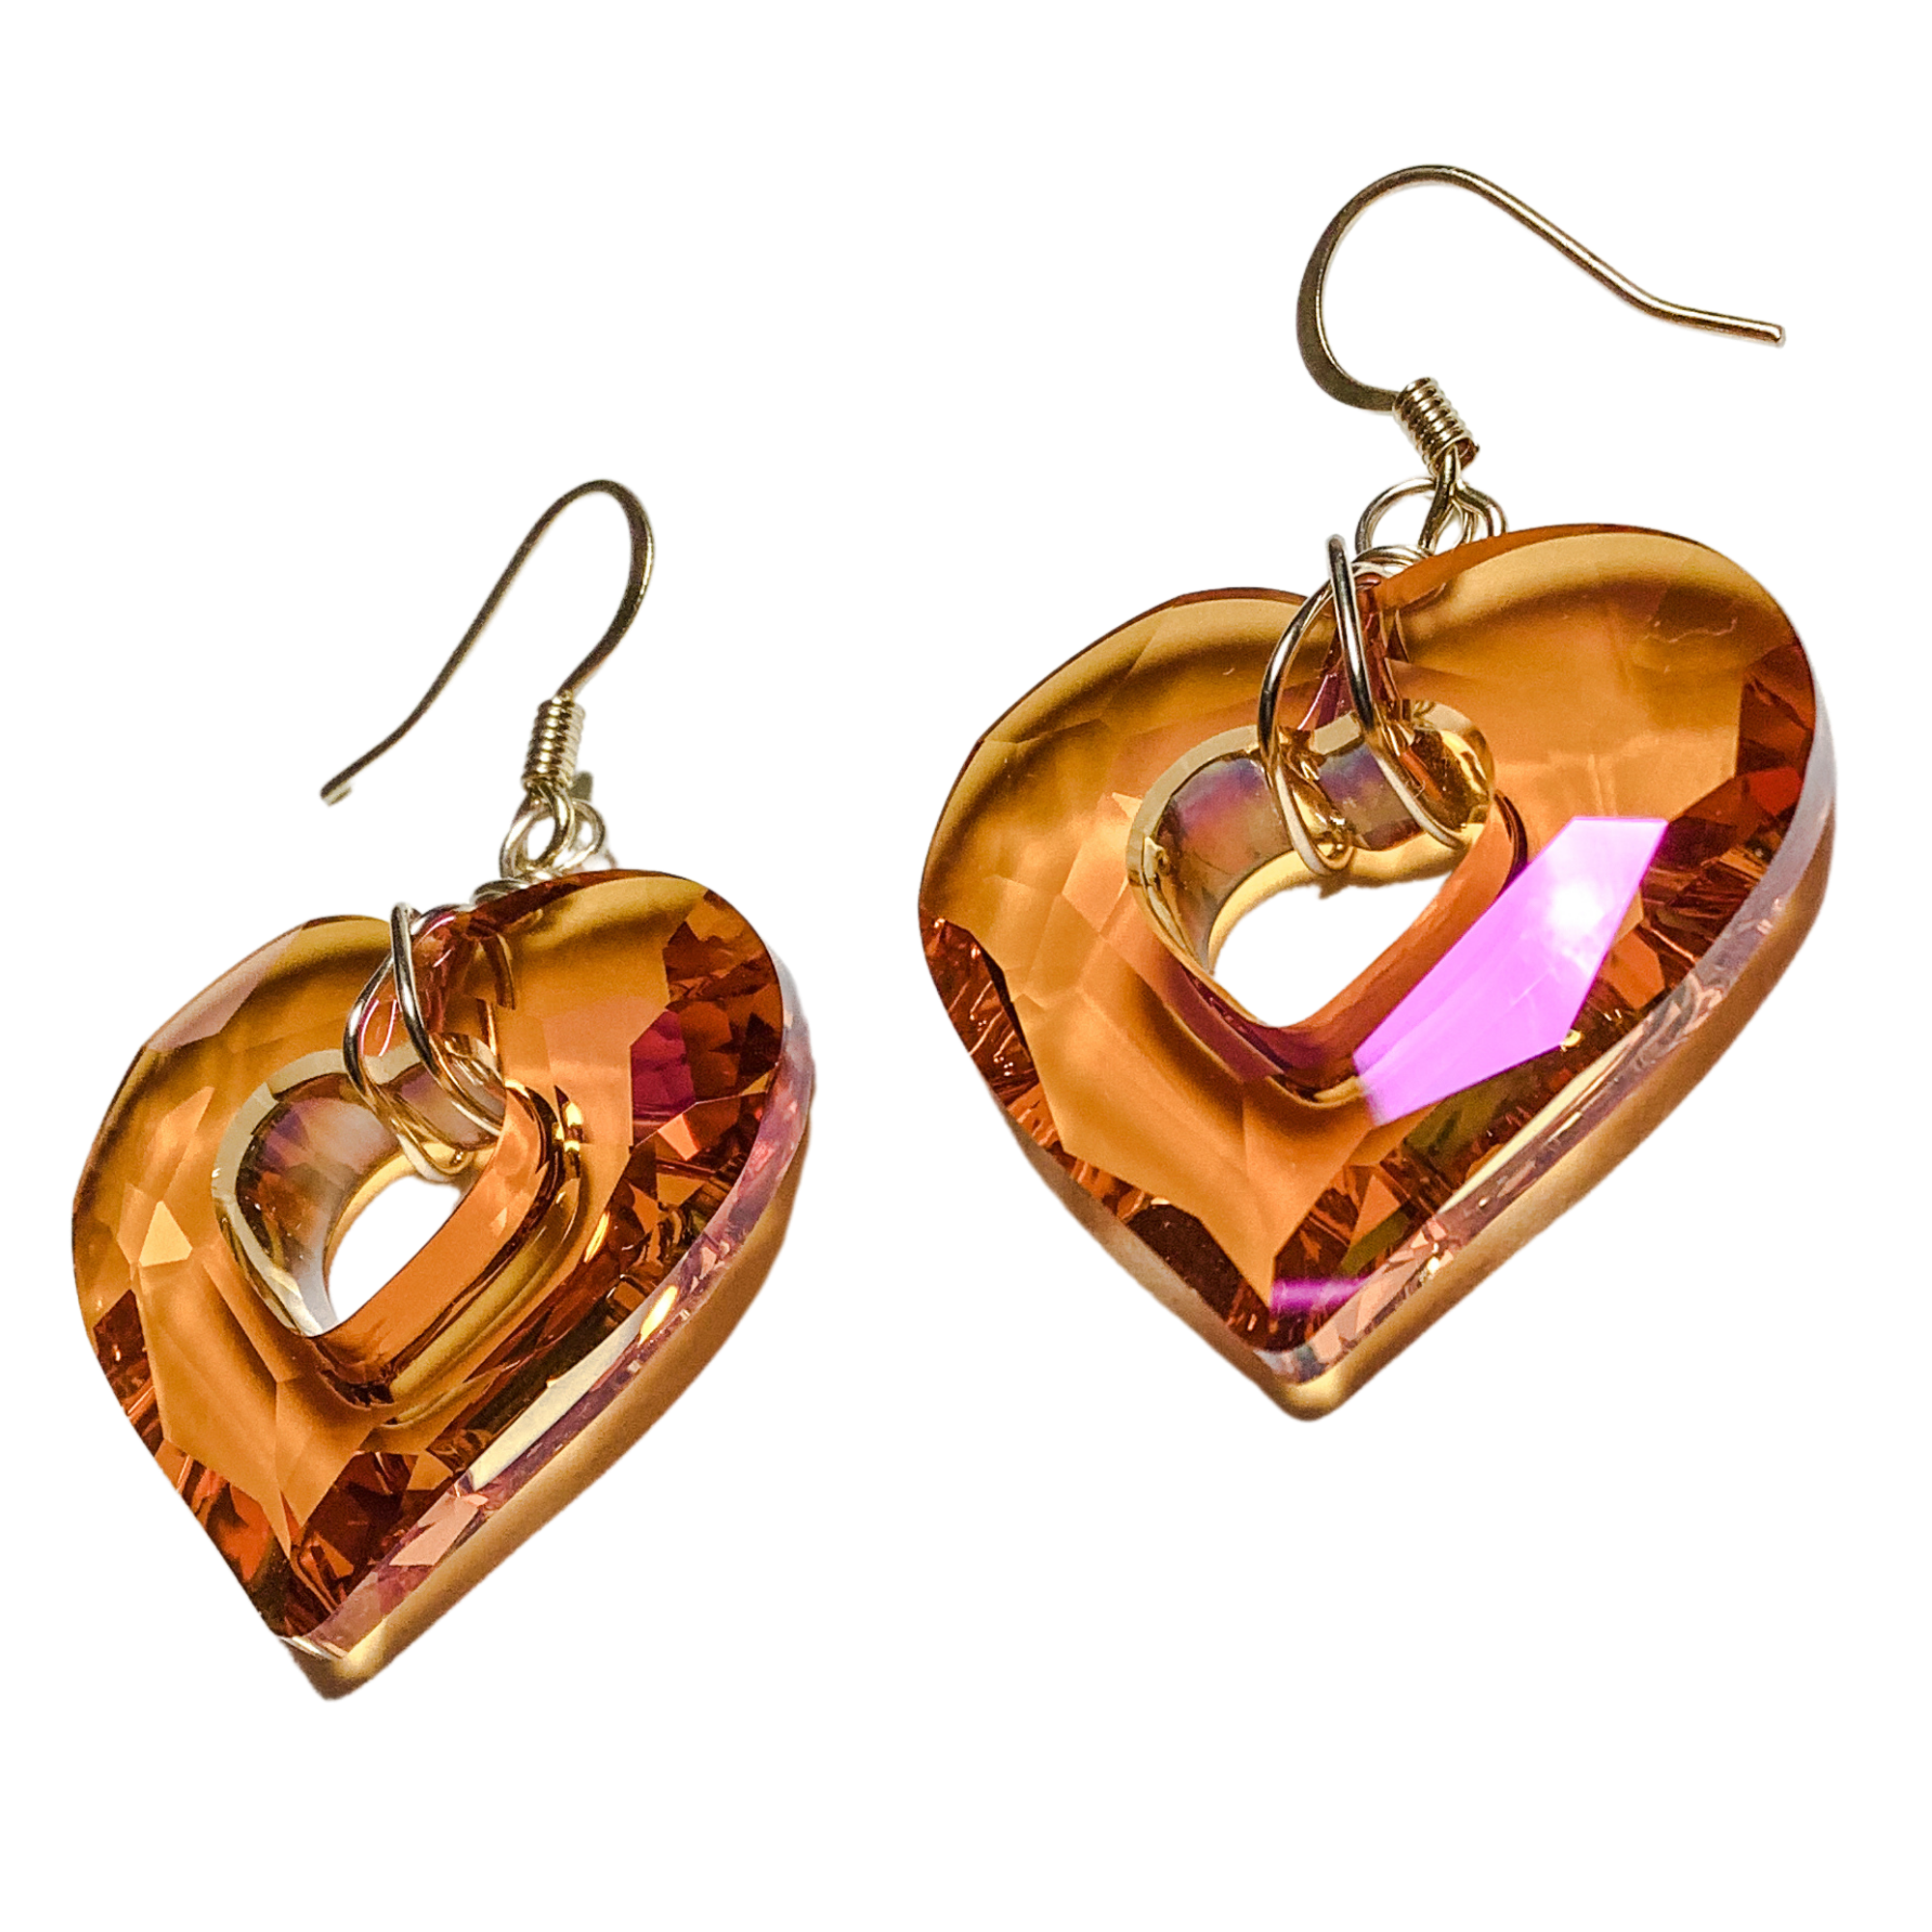 Crystal Passions Miss U Astral Pink heart earrings